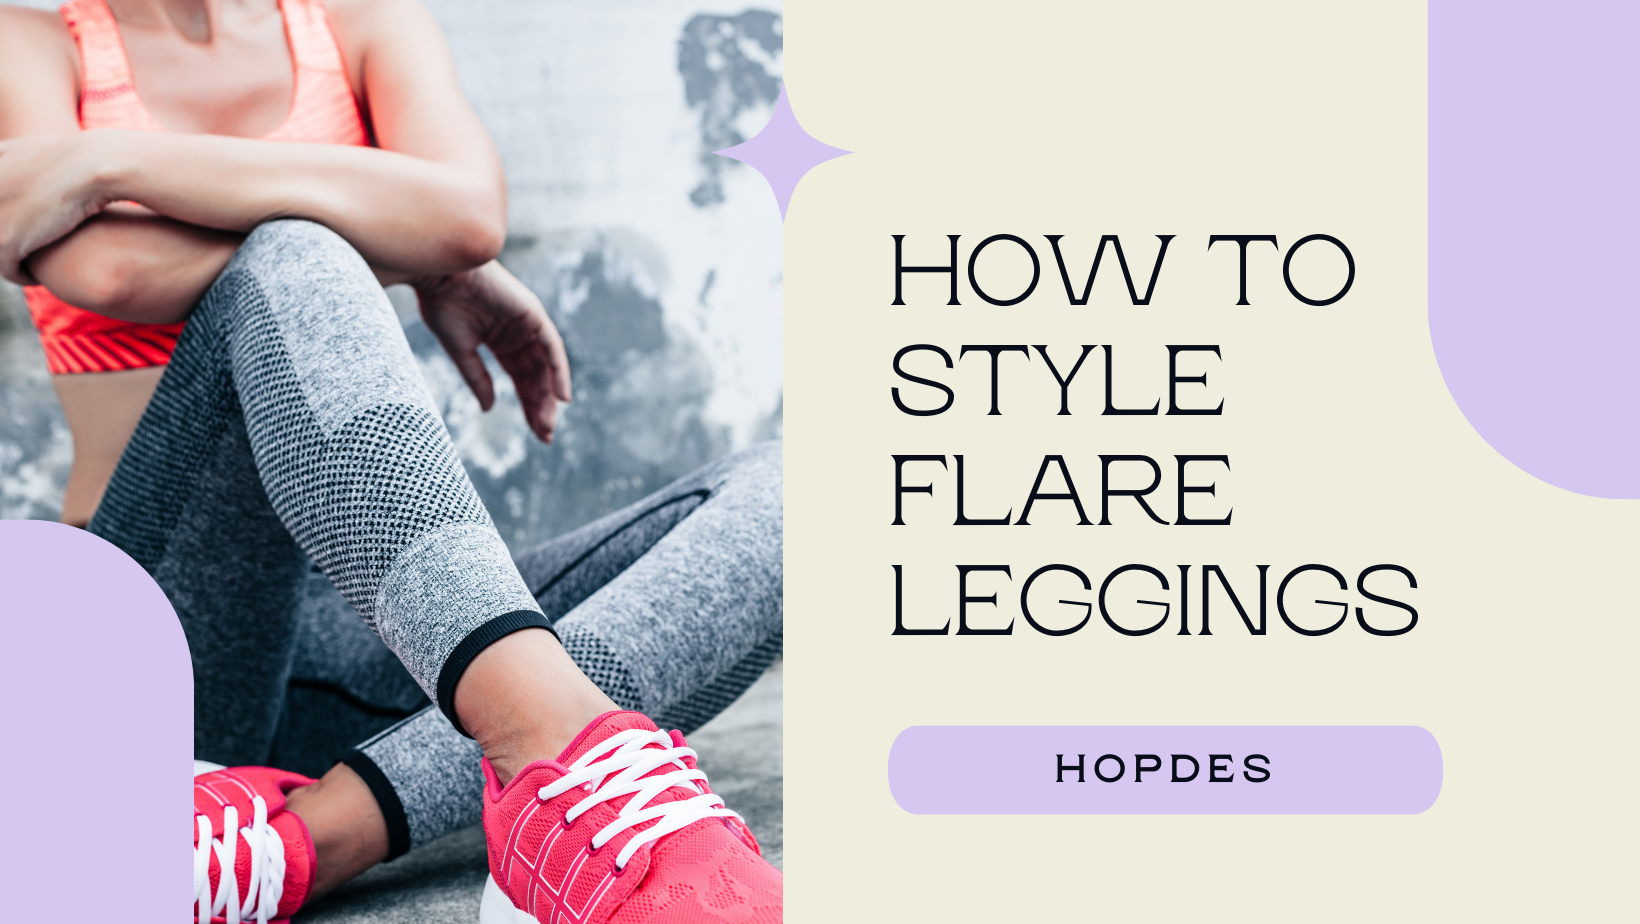 Flare leggings outfit inspo  Outfits with leggings, Flare